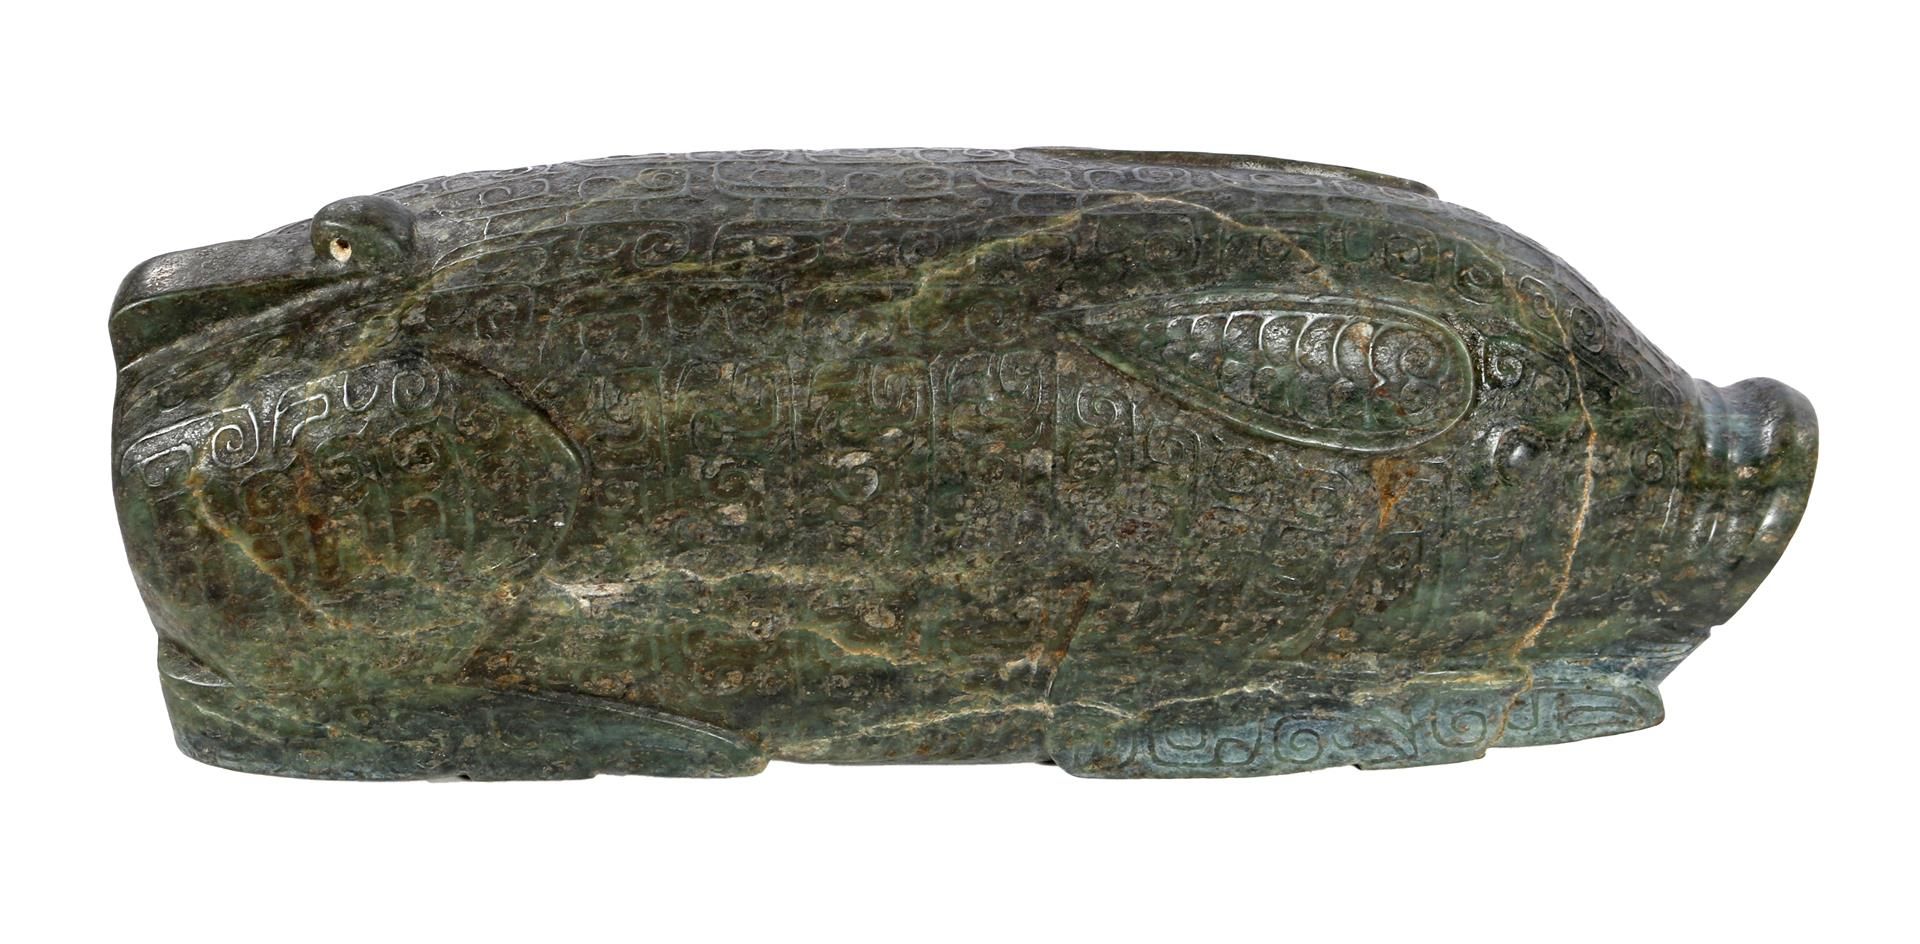 Jade carved statue of a lying pig, 65 cm long